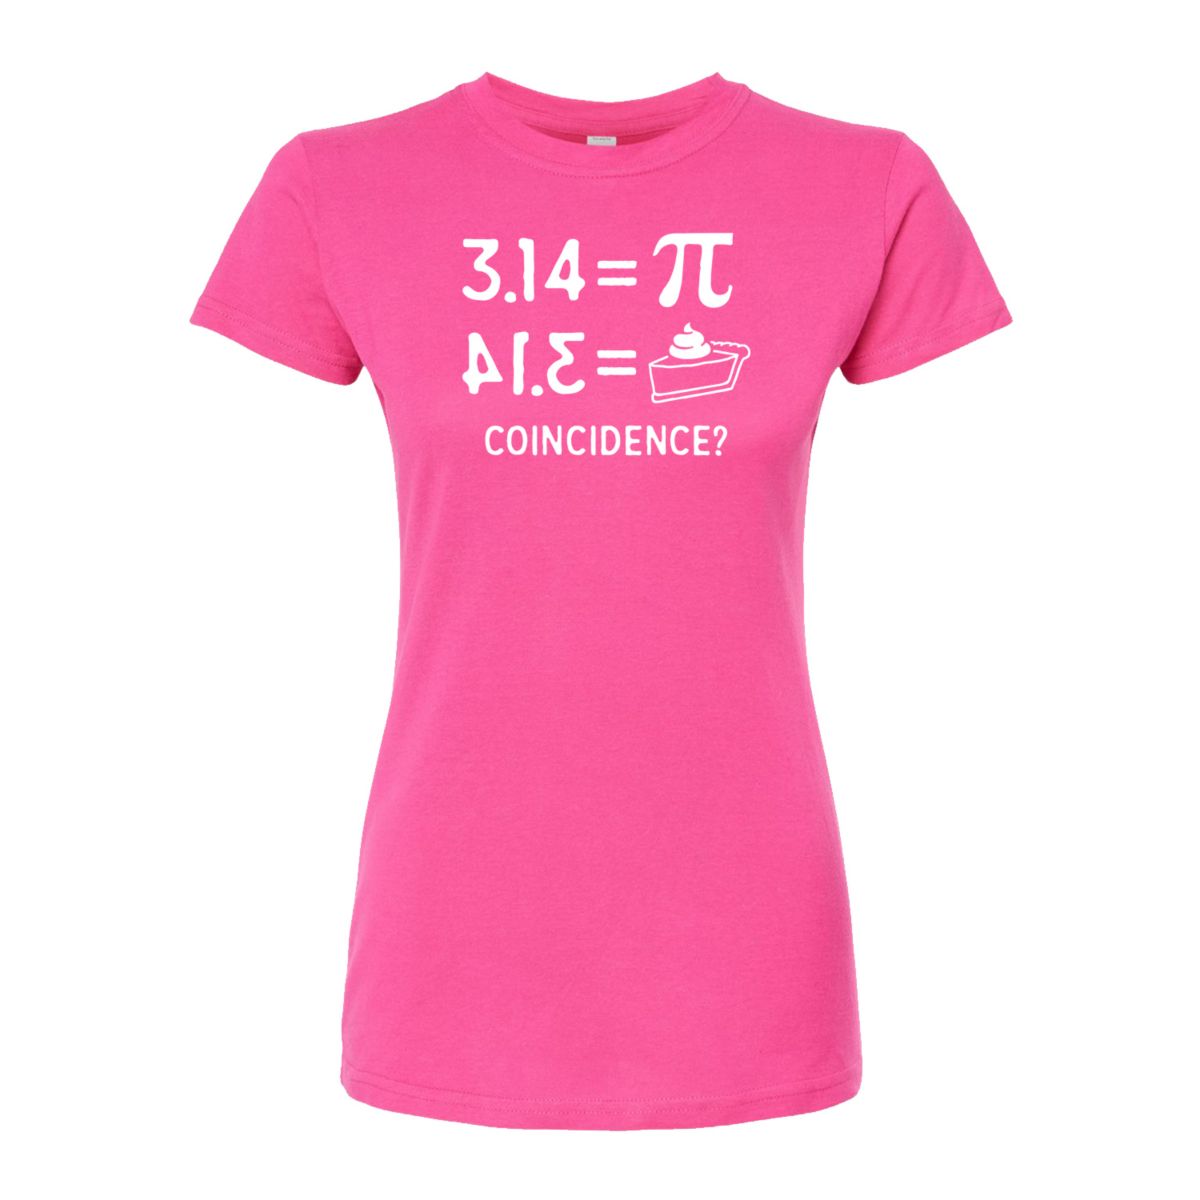 Juniors' &#34;Pi Equals Pie&#34; Fitted Graphic Tee Licensed Character